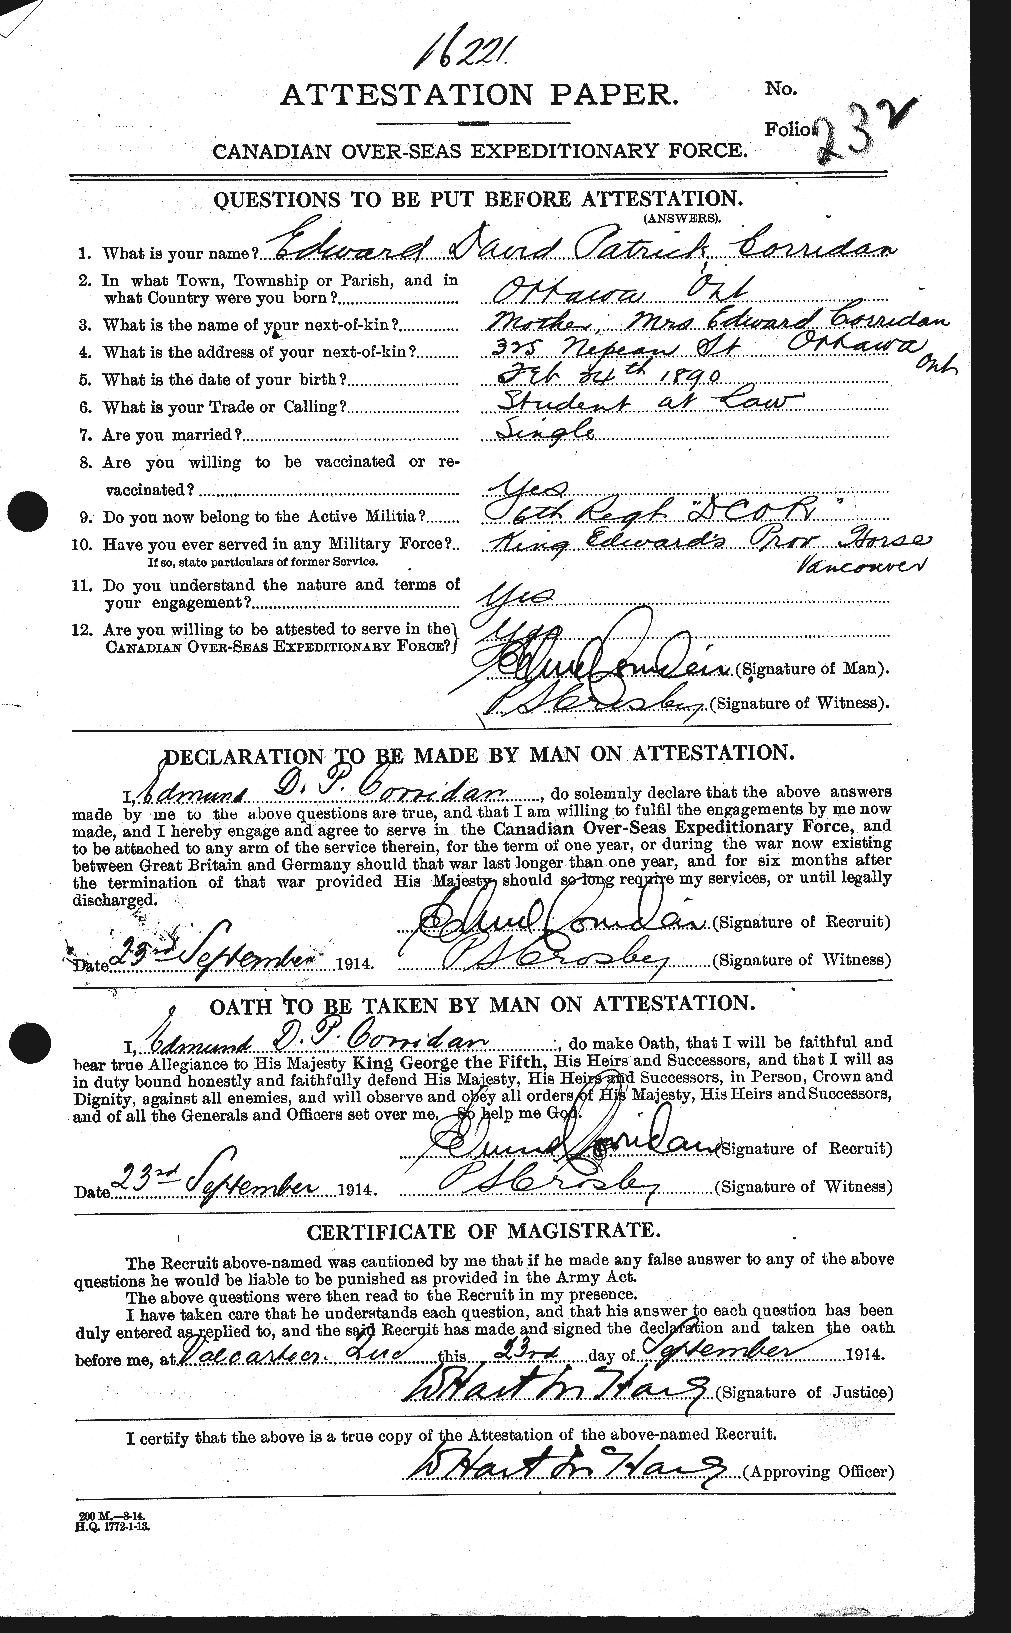 Personnel Records of the First World War - CEF 054985a